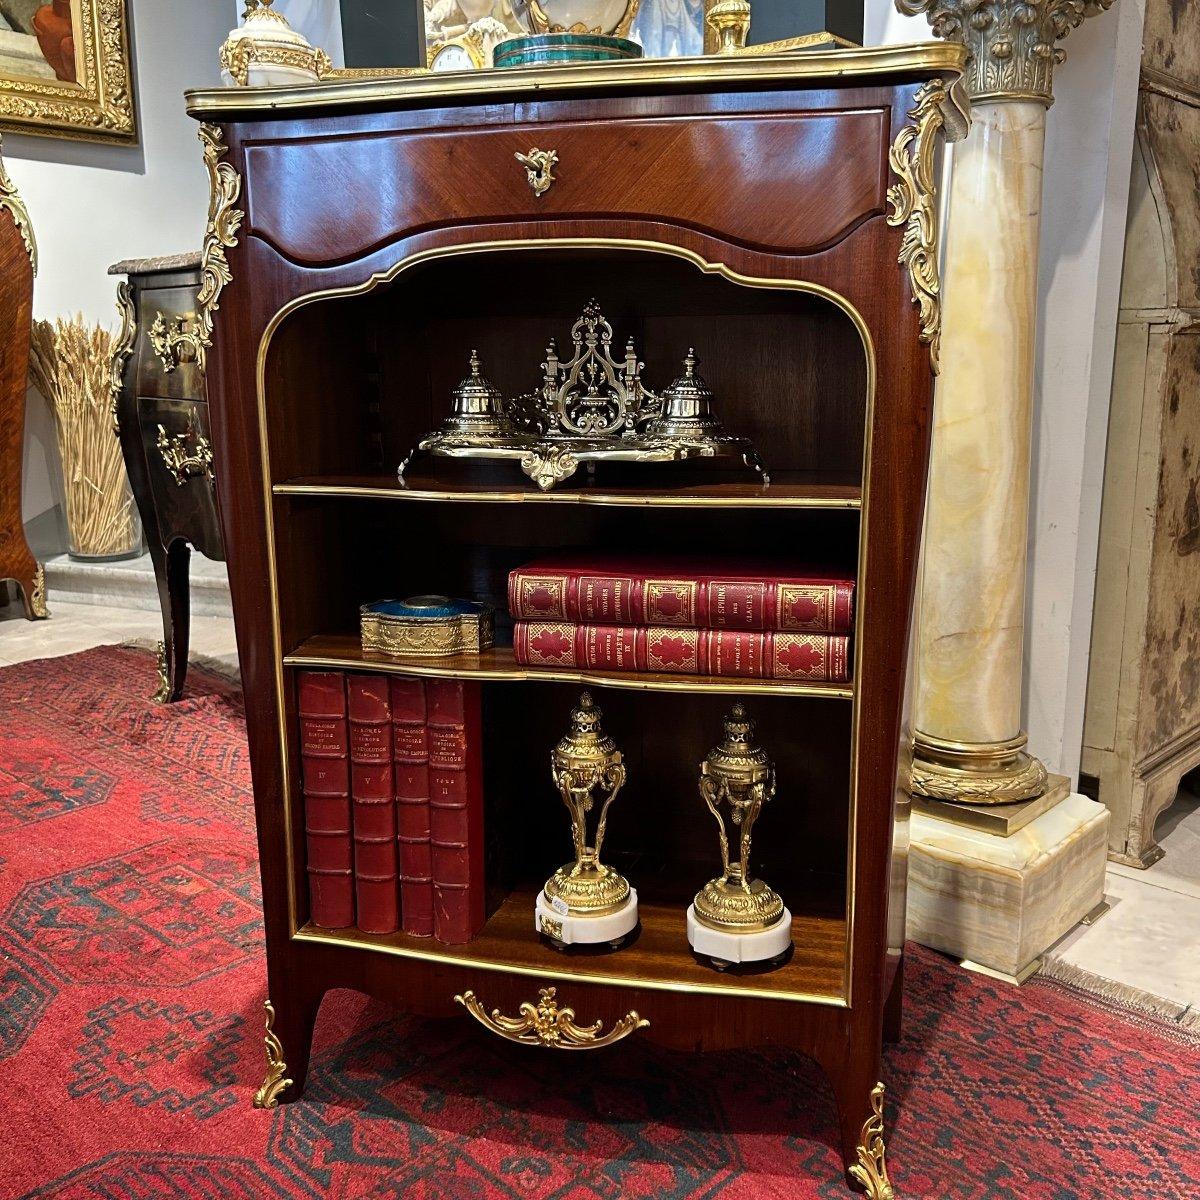 We present you this rare and charming 19th century, Louis XV-style small open bookcase, known as a 'bibus' in French. It has graceful curves on its front and sides and boasts a 'Brèche d'Alep' marble top, elegantly encircled by a gilded bronze